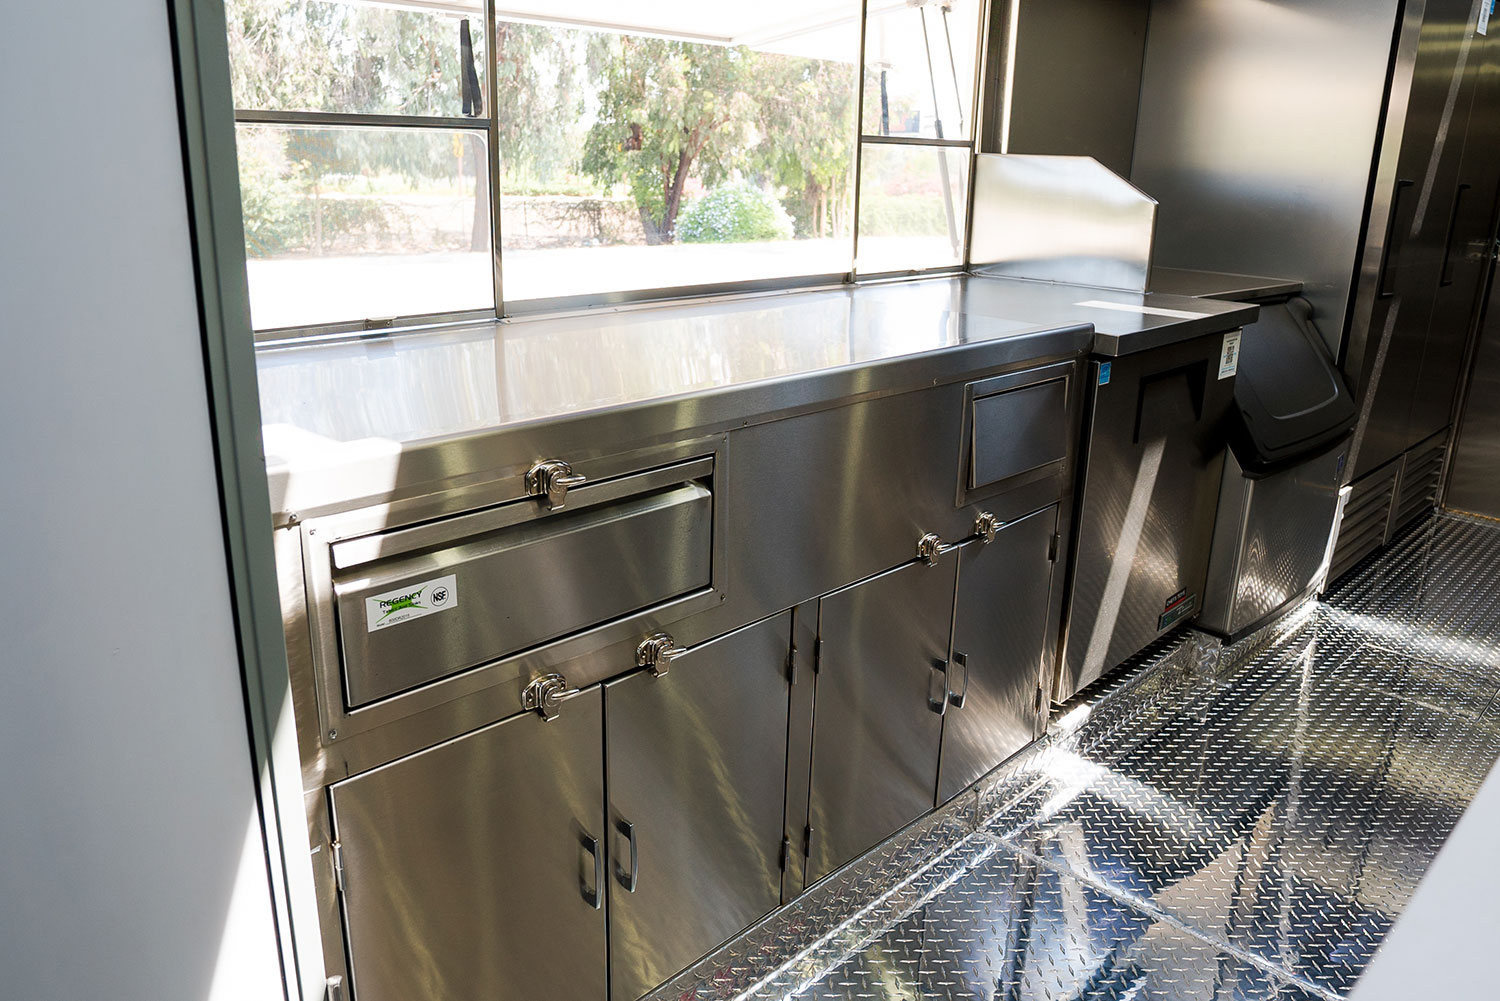 5 Food Truck Storage Ideas to Maximize Interior Space